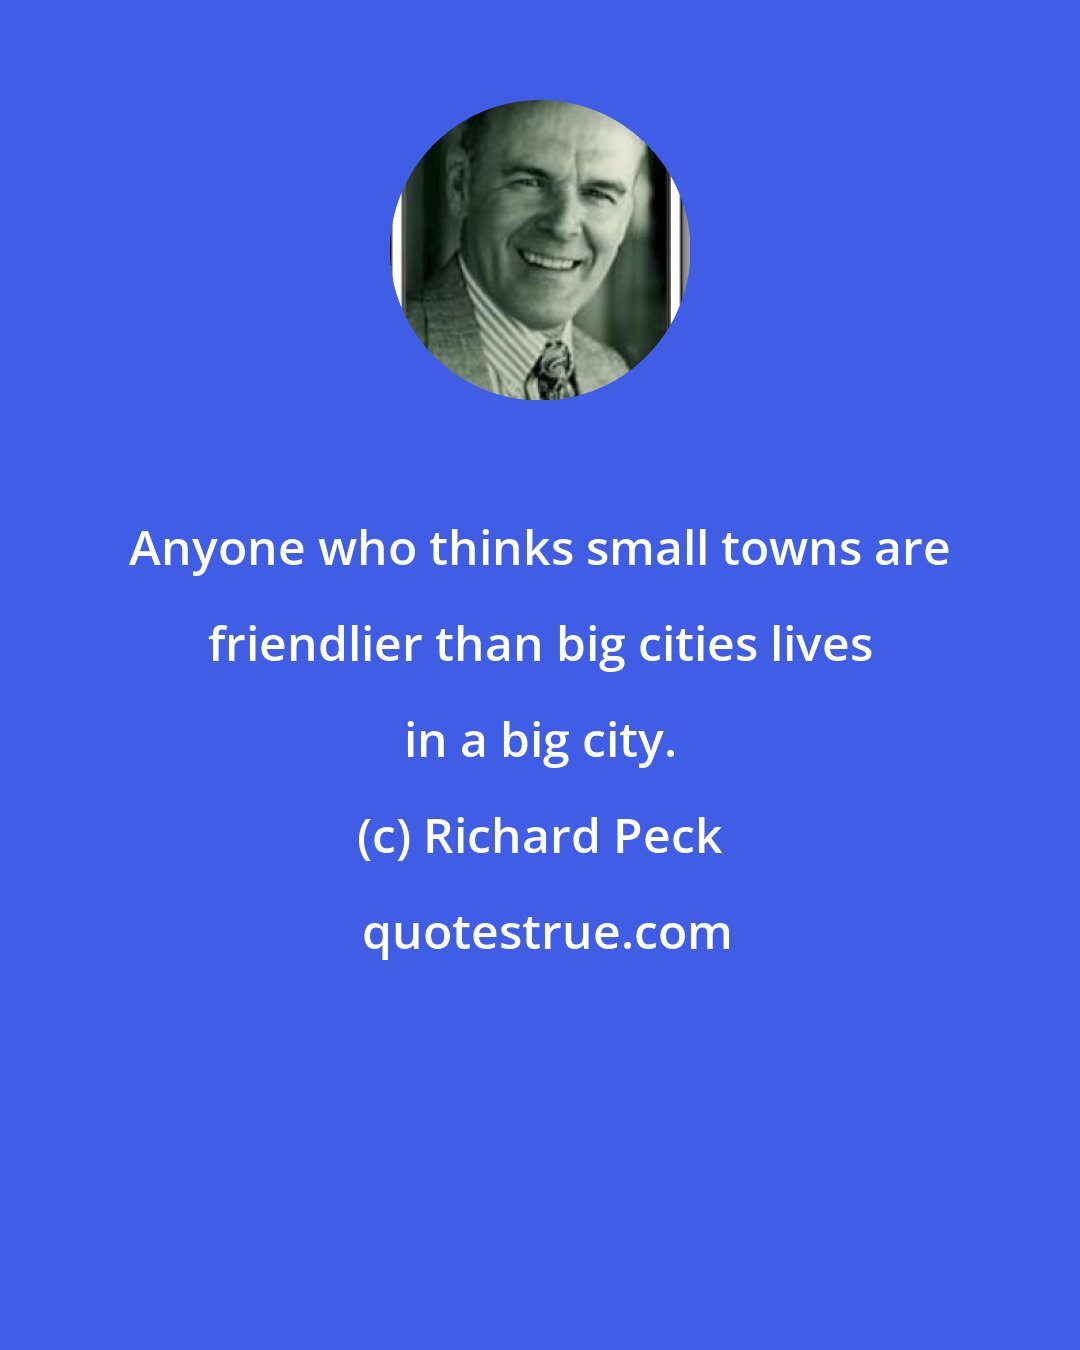 Richard Peck: Anyone who thinks small towns are friendlier than big cities lives in a big city.